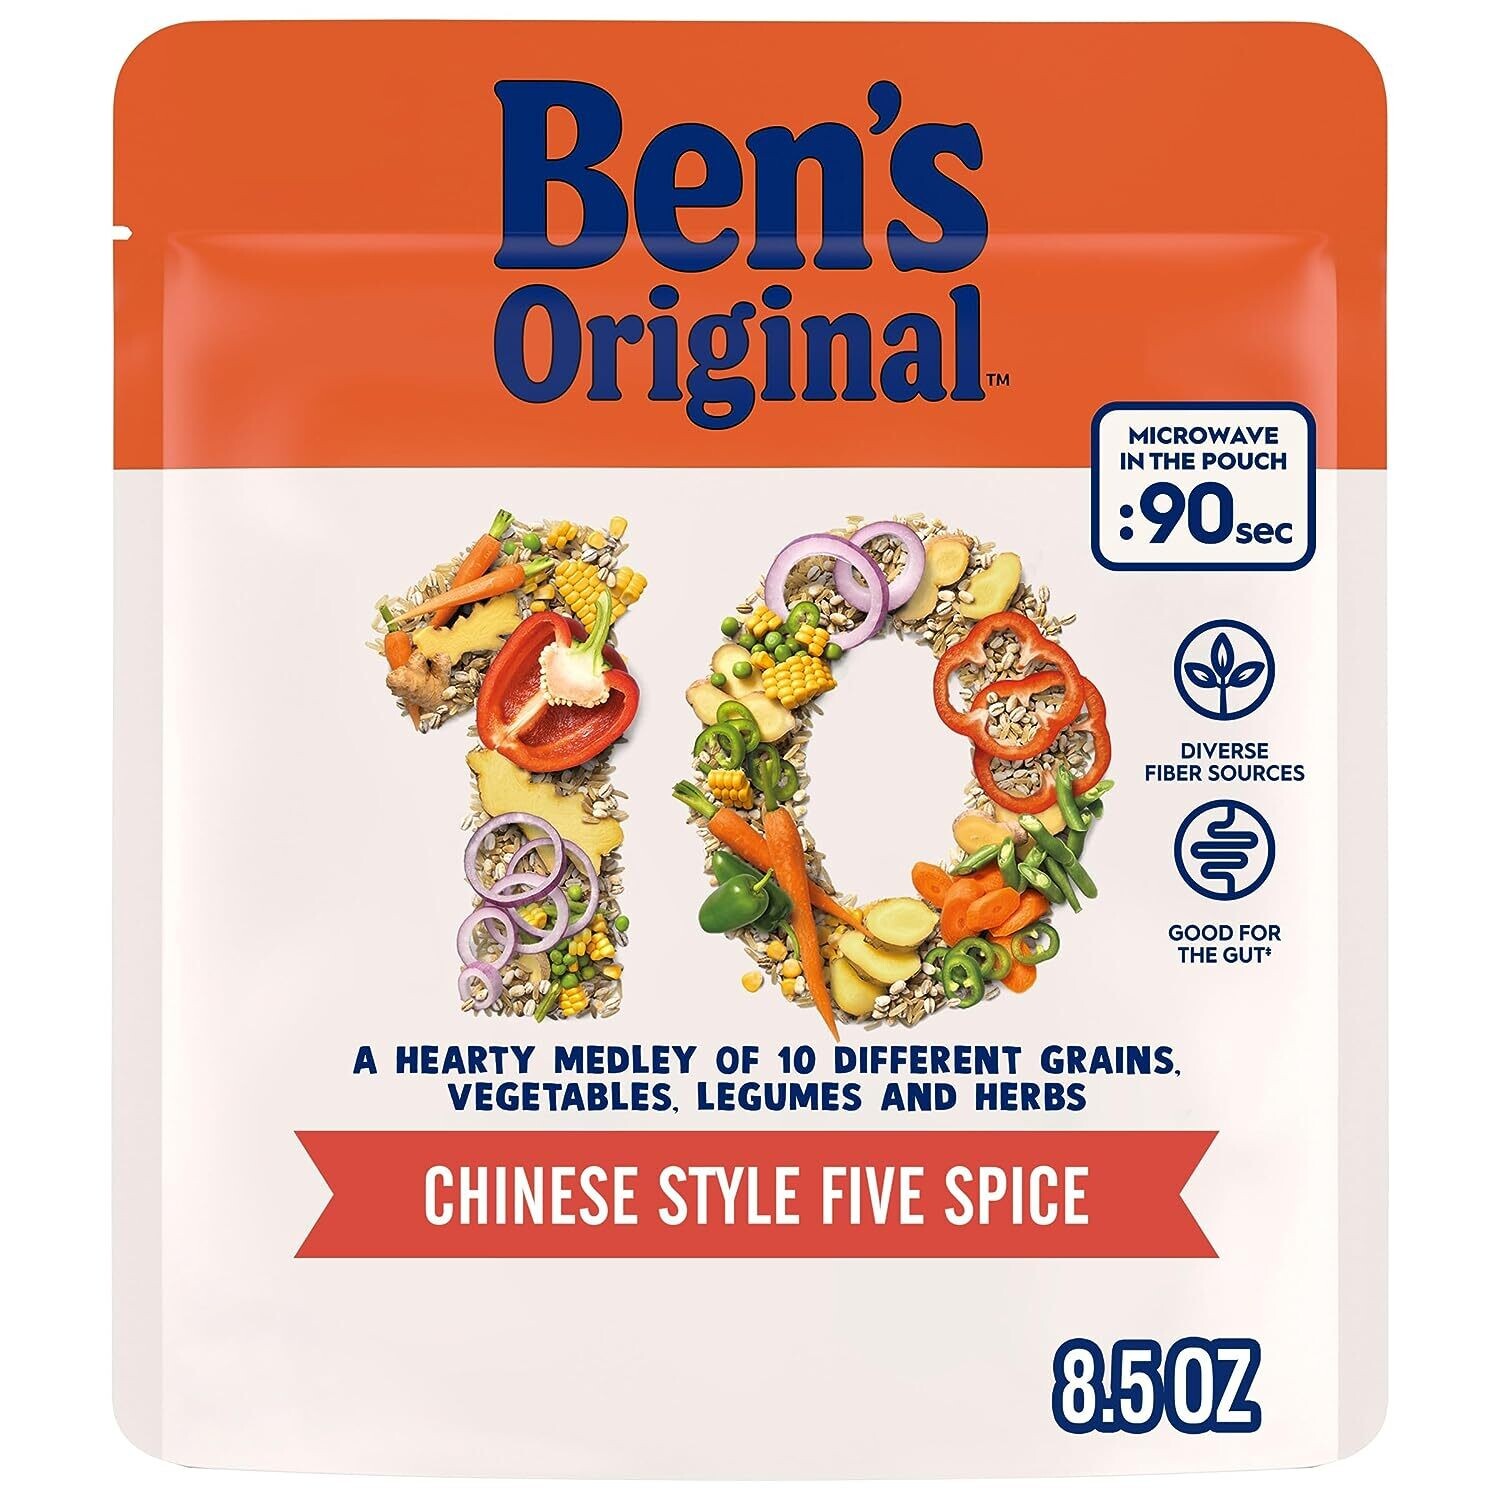 Ben's Original 10 Medley - Chinese Style Five Spice